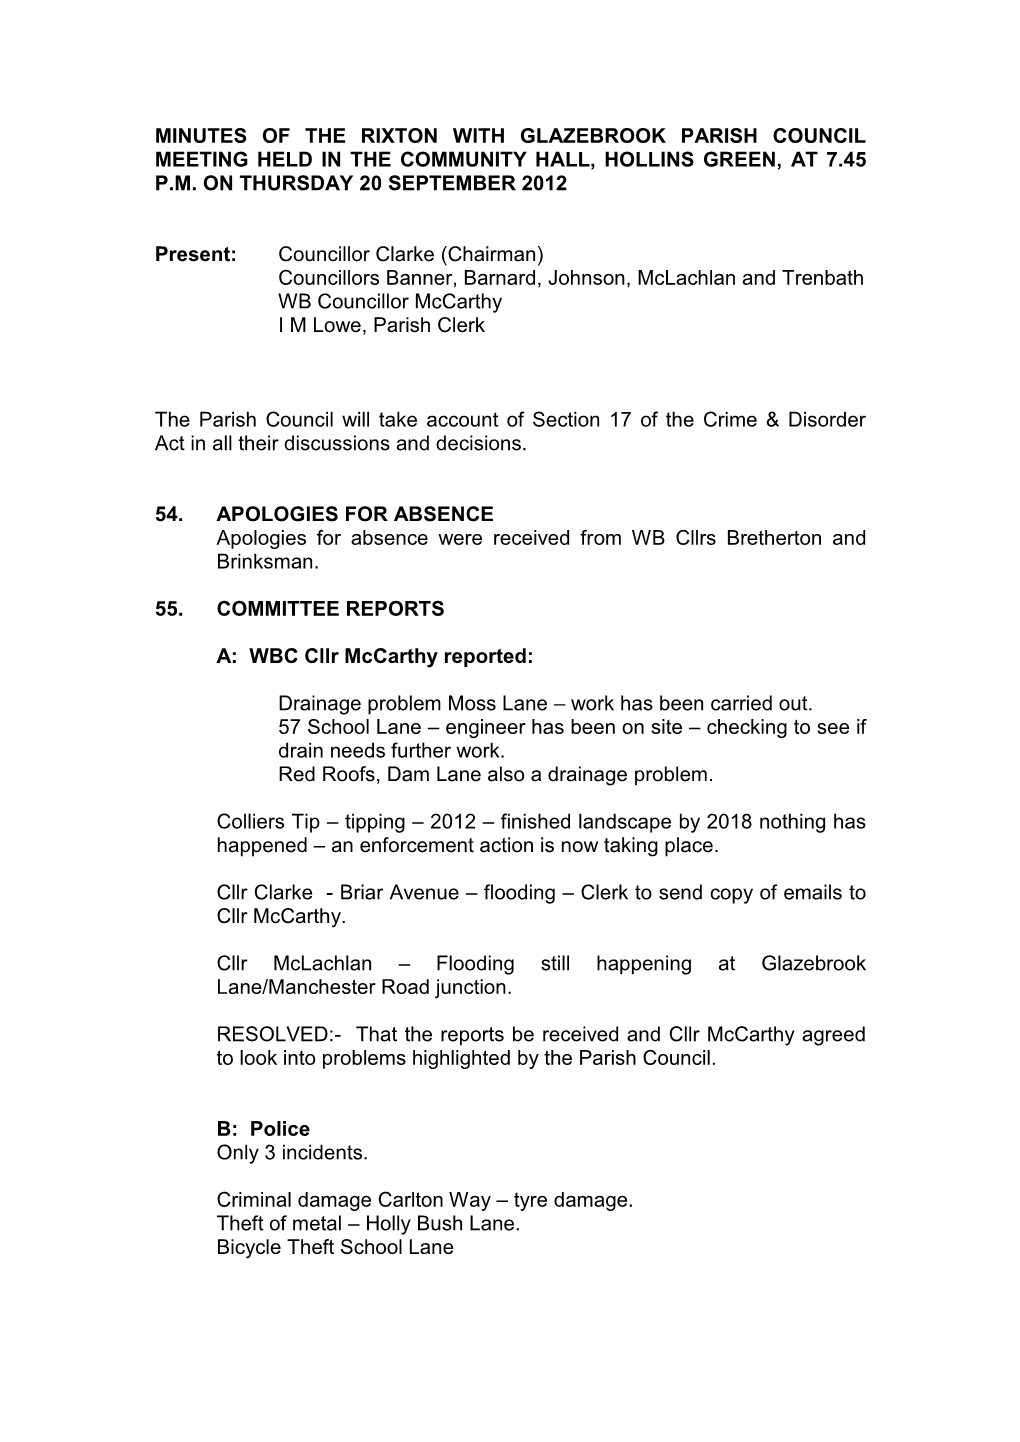 Minutes of the Meeting of the Rixton with Glazebrook Parish Council Held in the Community Hall, Hollins Green, on Thursday 20